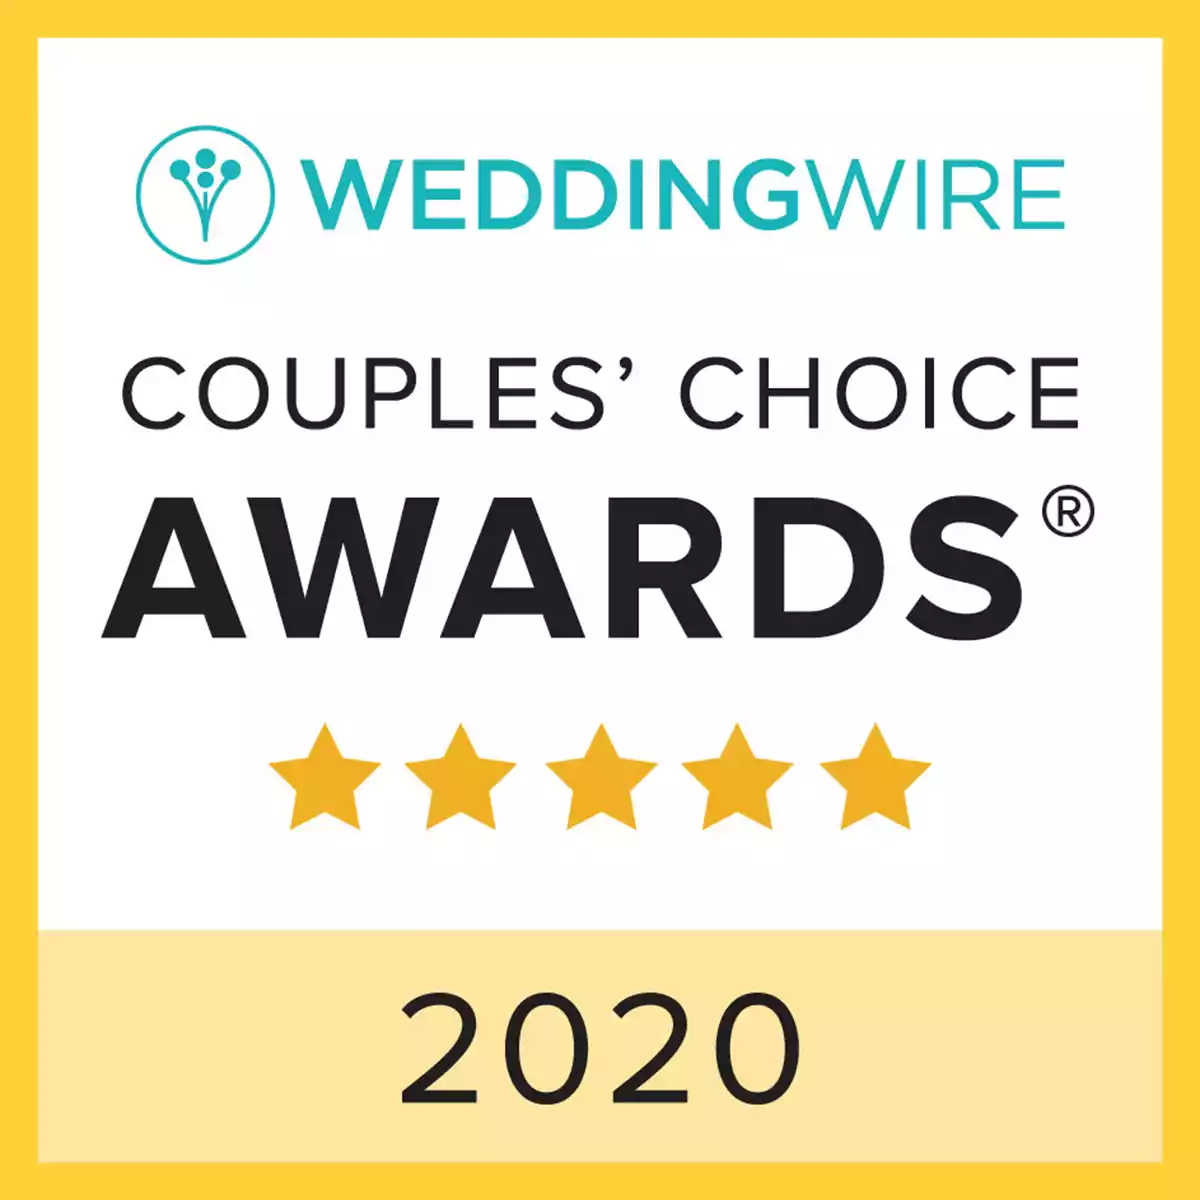 Wedding Wire Couples' Choice Awards 2020 Union Bluff